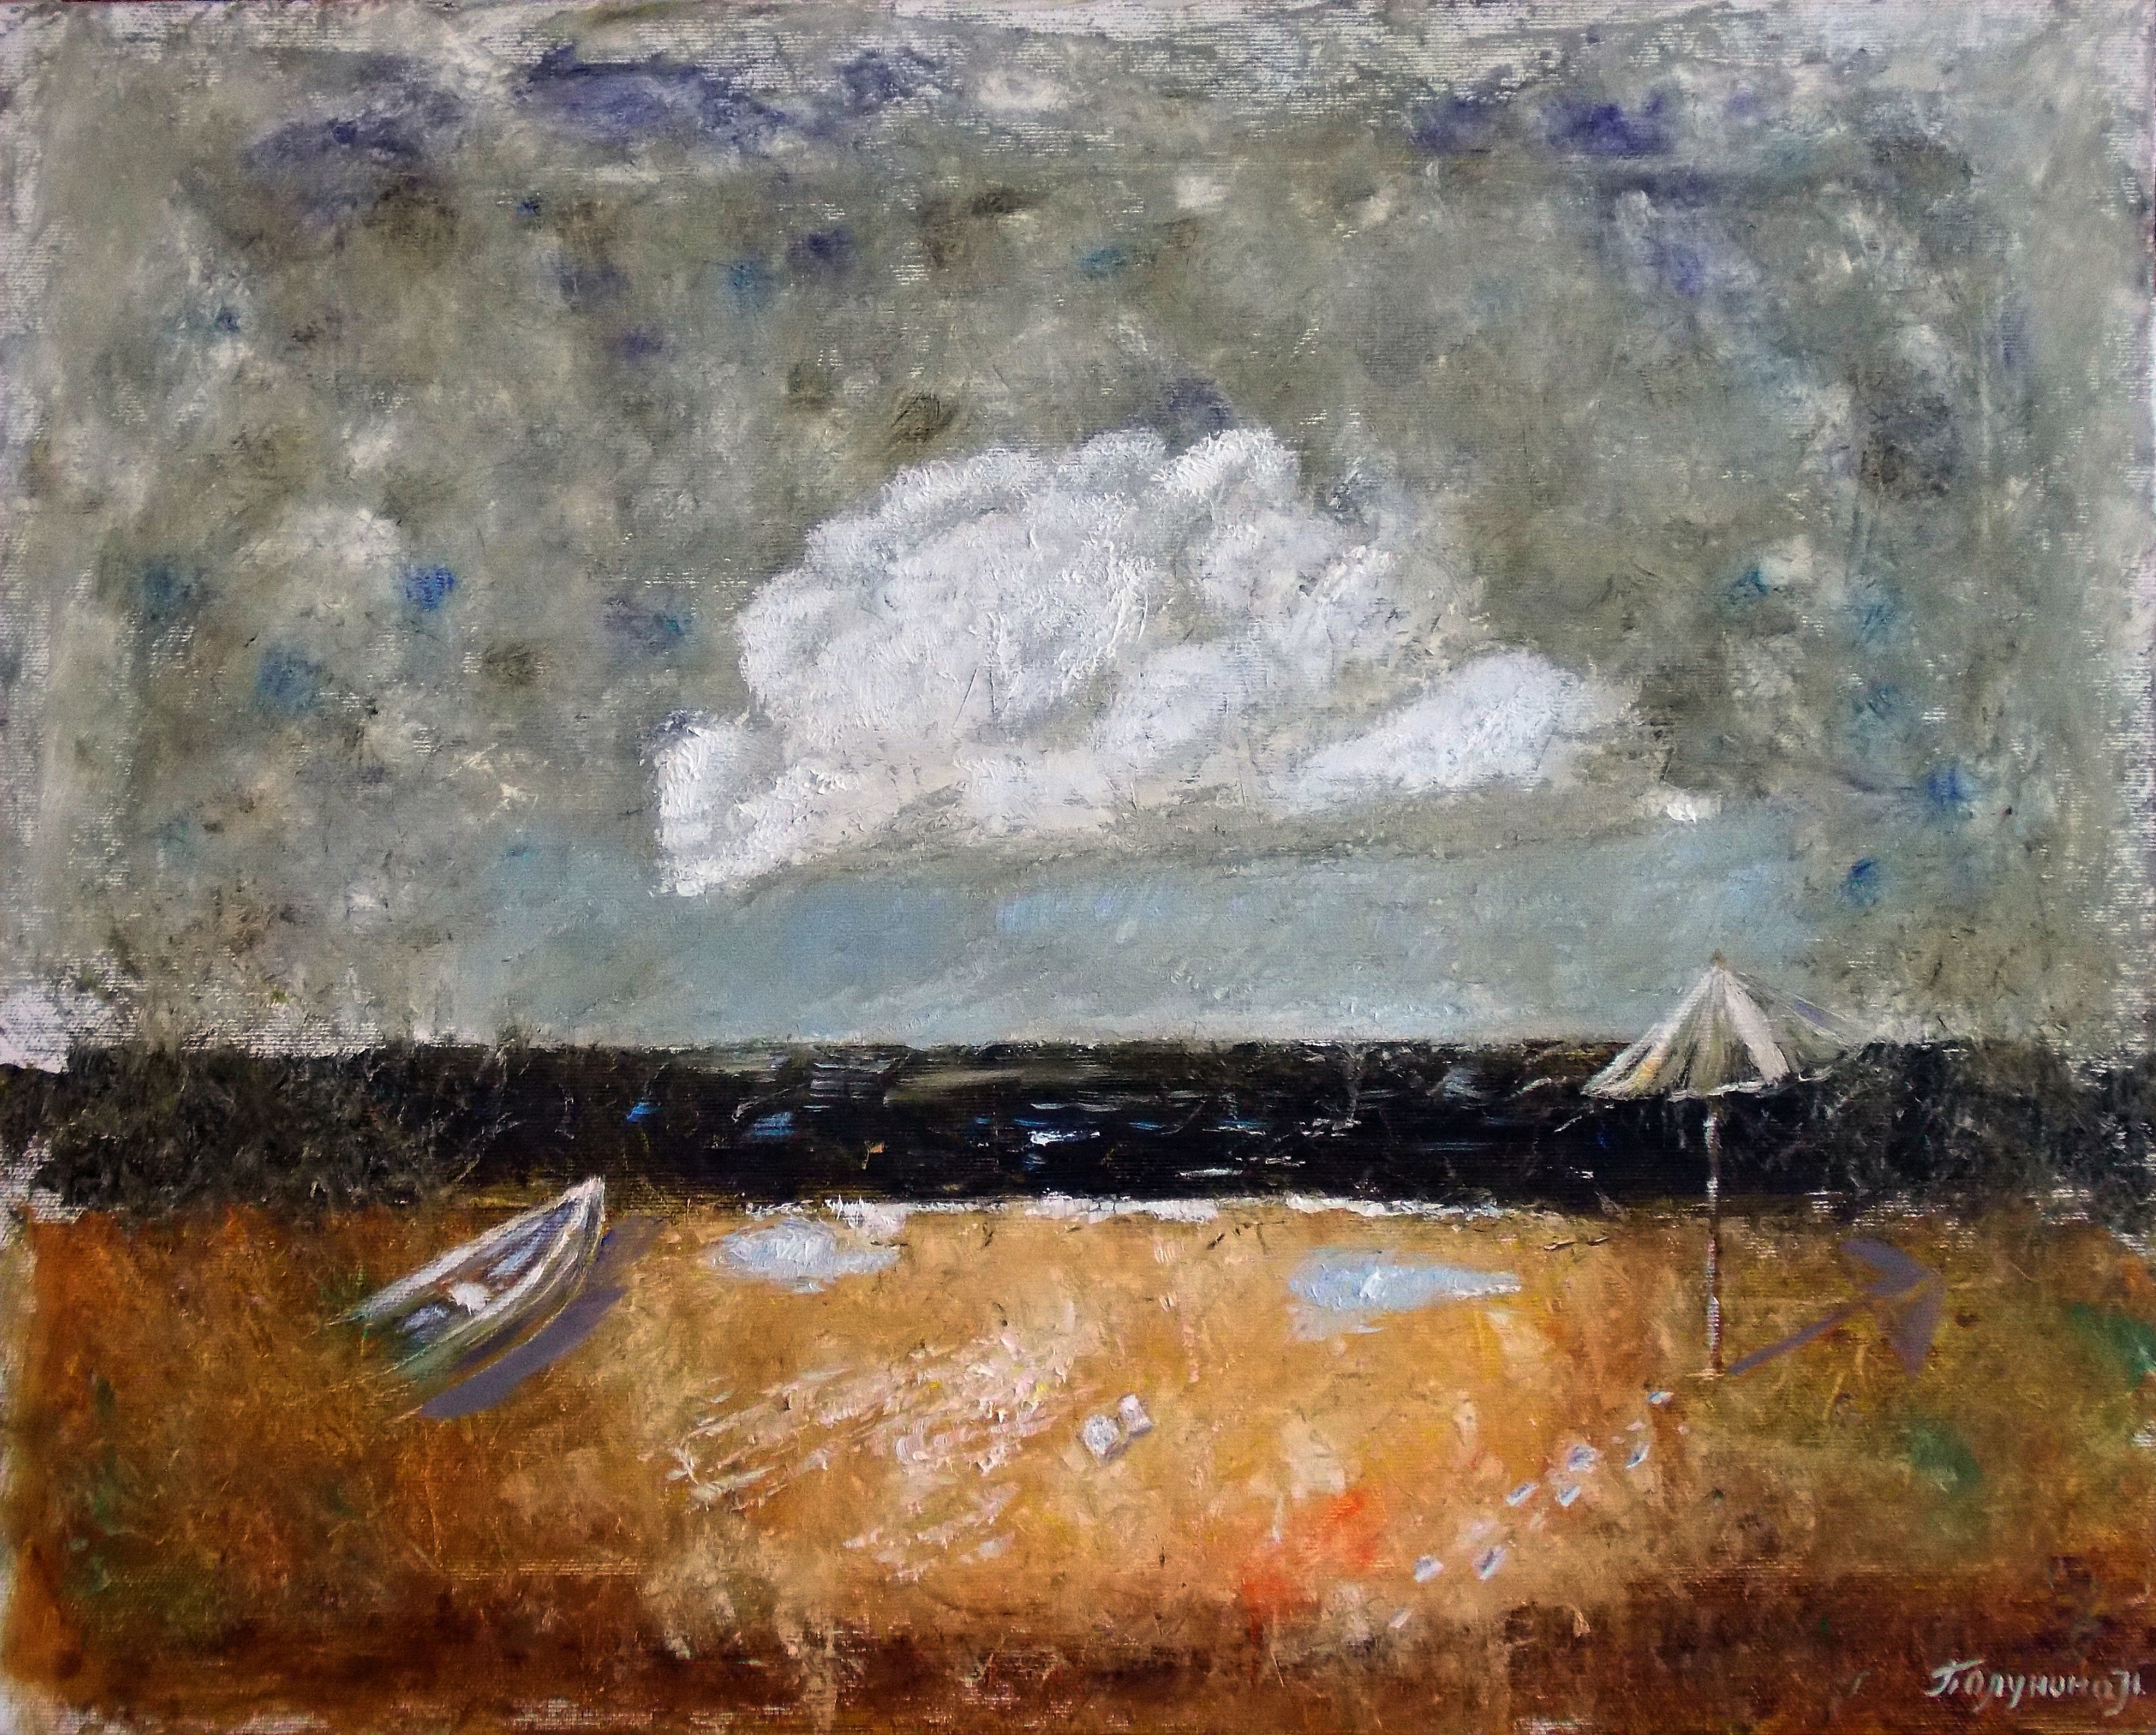 Nina Polunina; Just A Cloud, 2016, Original Painting Oil, 20 x 16 inches. Artwork description: 241 Just a cloud.  And someones footprints.  That kind of mood.Work done with a palette knife.  Mounts.  Ready to hang.Beach, Sea, Seascape, White Cloud, Brown, Oil Painting, Palette Knife, Landscape With Cloud, Modern Impressionism, Medium...